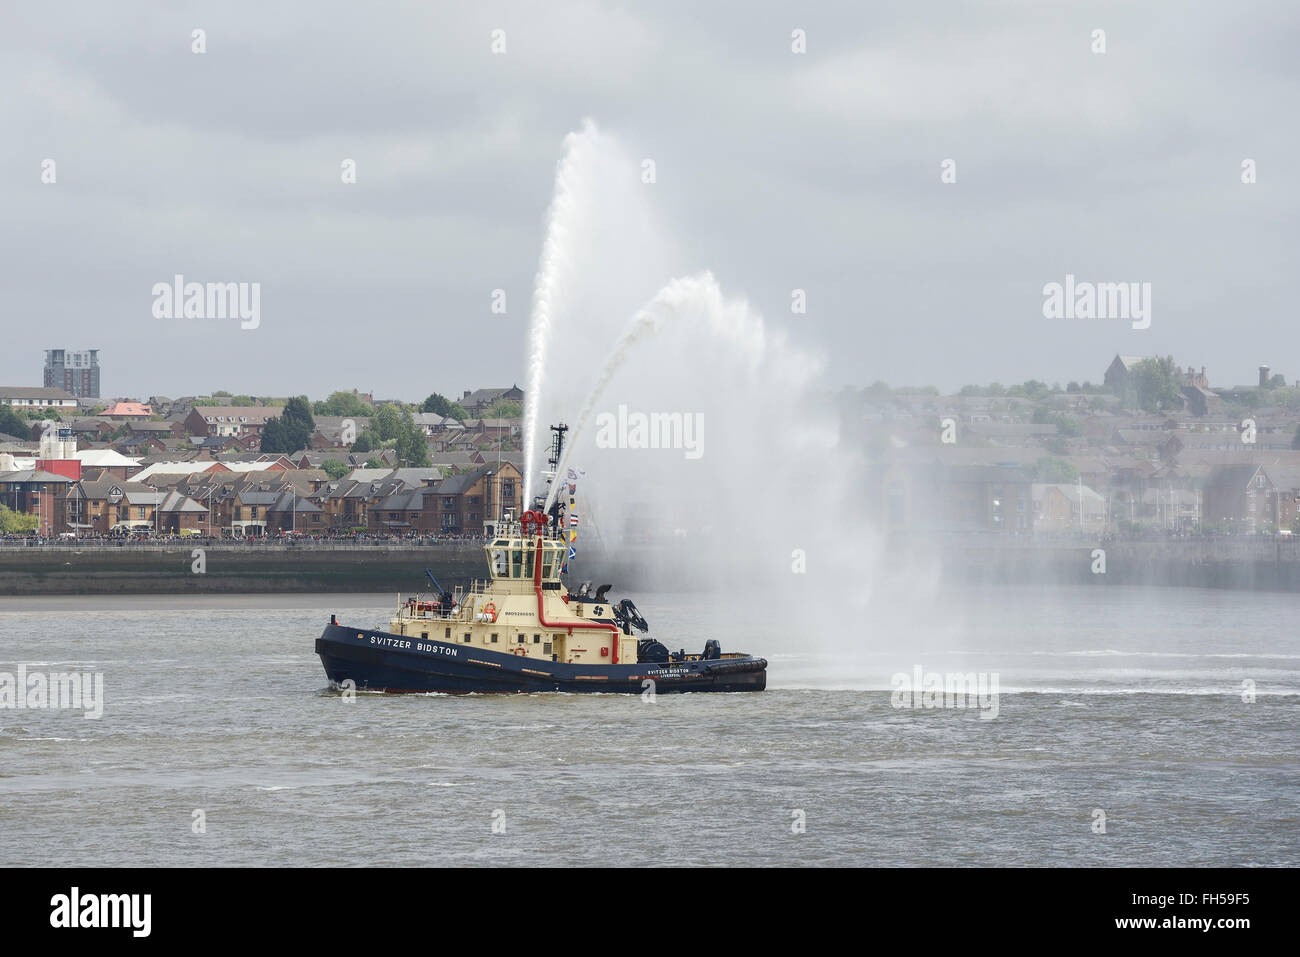 A fire boat on the River Mersey Liverpool UK Stock Photo